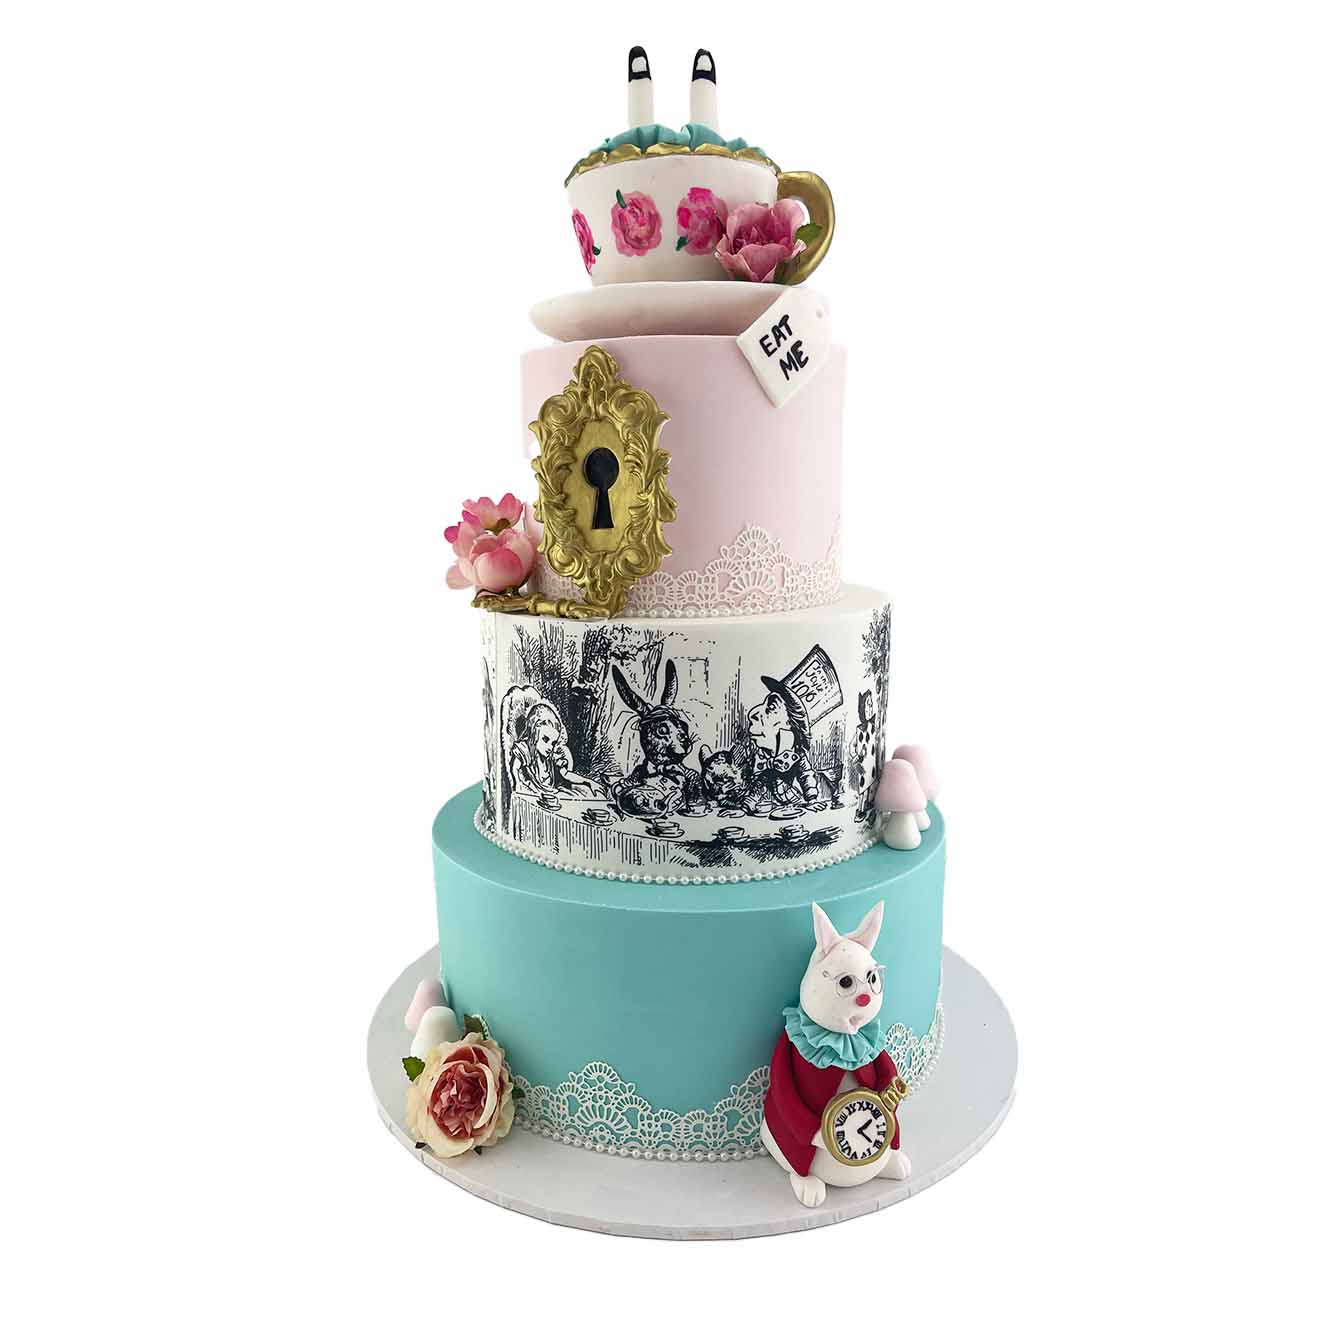 Wonderland Tea Party Cake - A three-tier cake with a teacup featuring Alice, Mad Hatter's tea party image wrap, aqua iced base with edible lace, and the White Rabbit, capturing the enchantment of Wonderland.